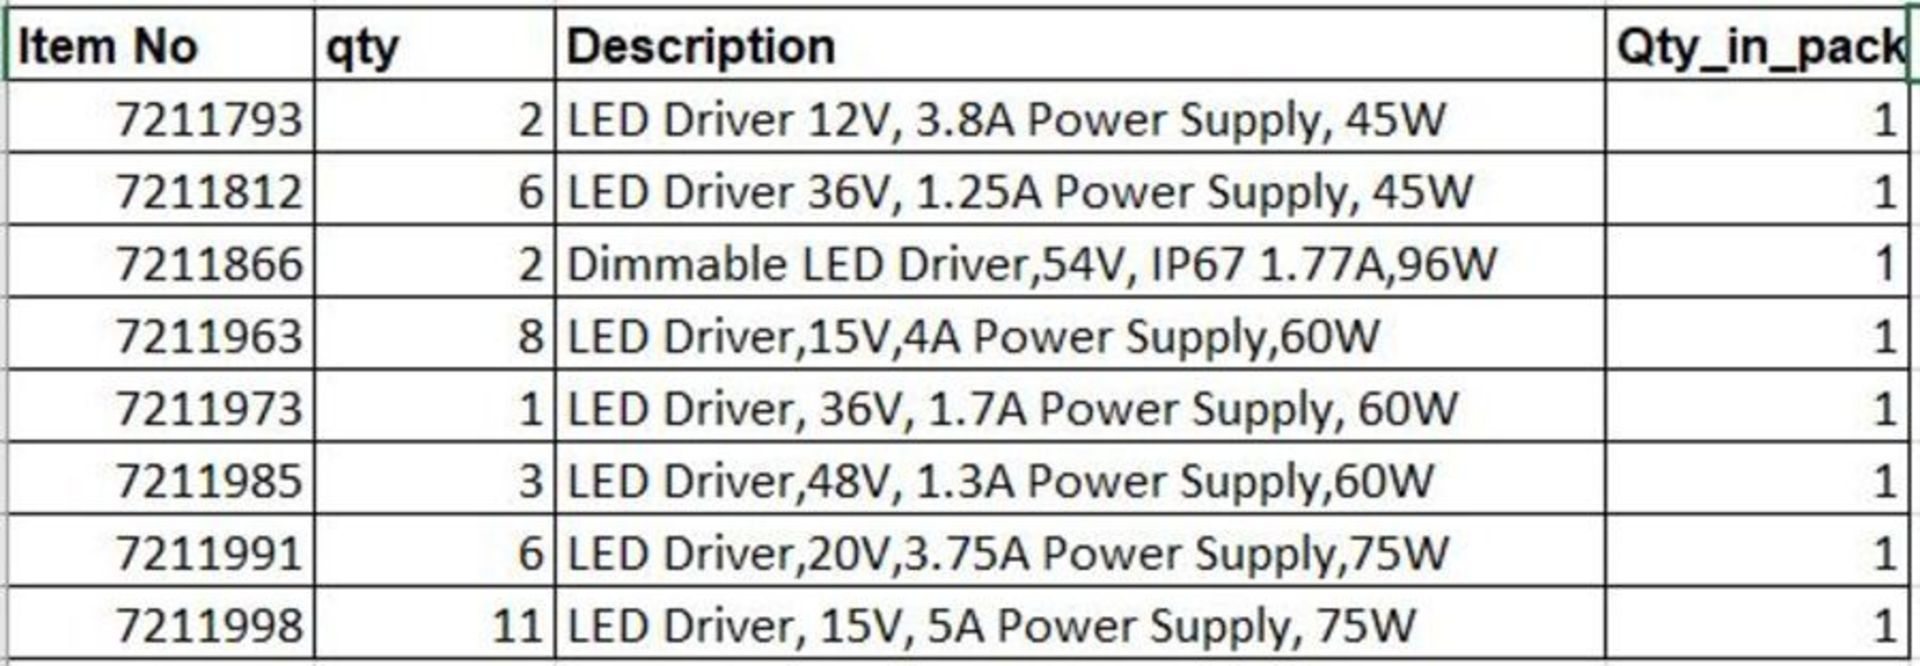 39 Various Constant Current LED Drivers - 8 different items - Image 6 of 6